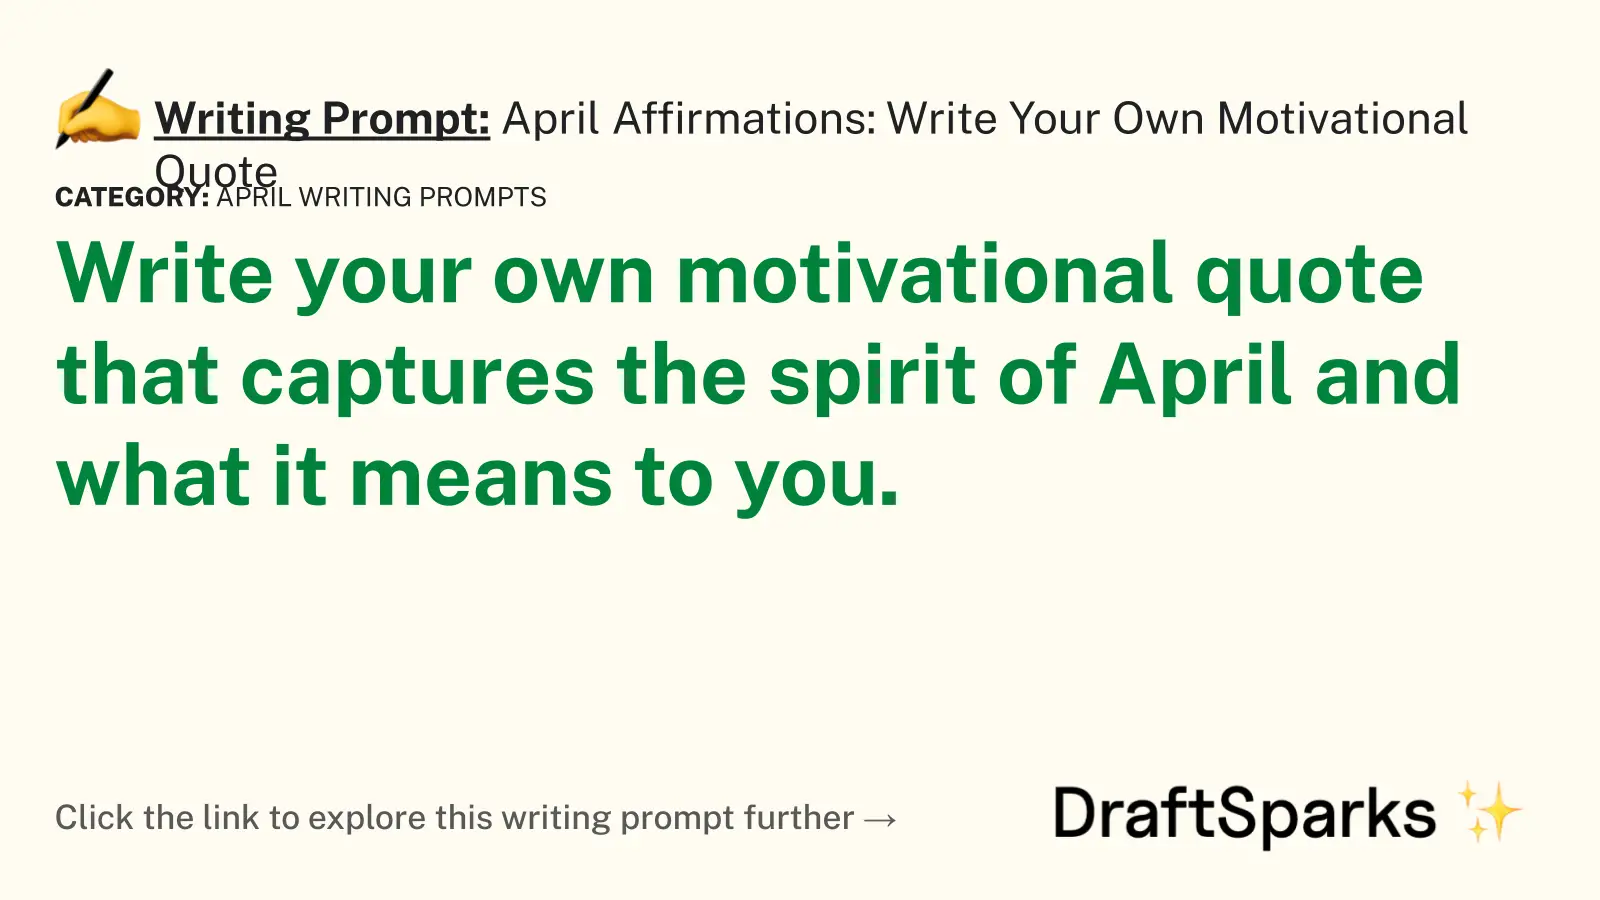 April Affirmations: Write Your Own Motivational Quote